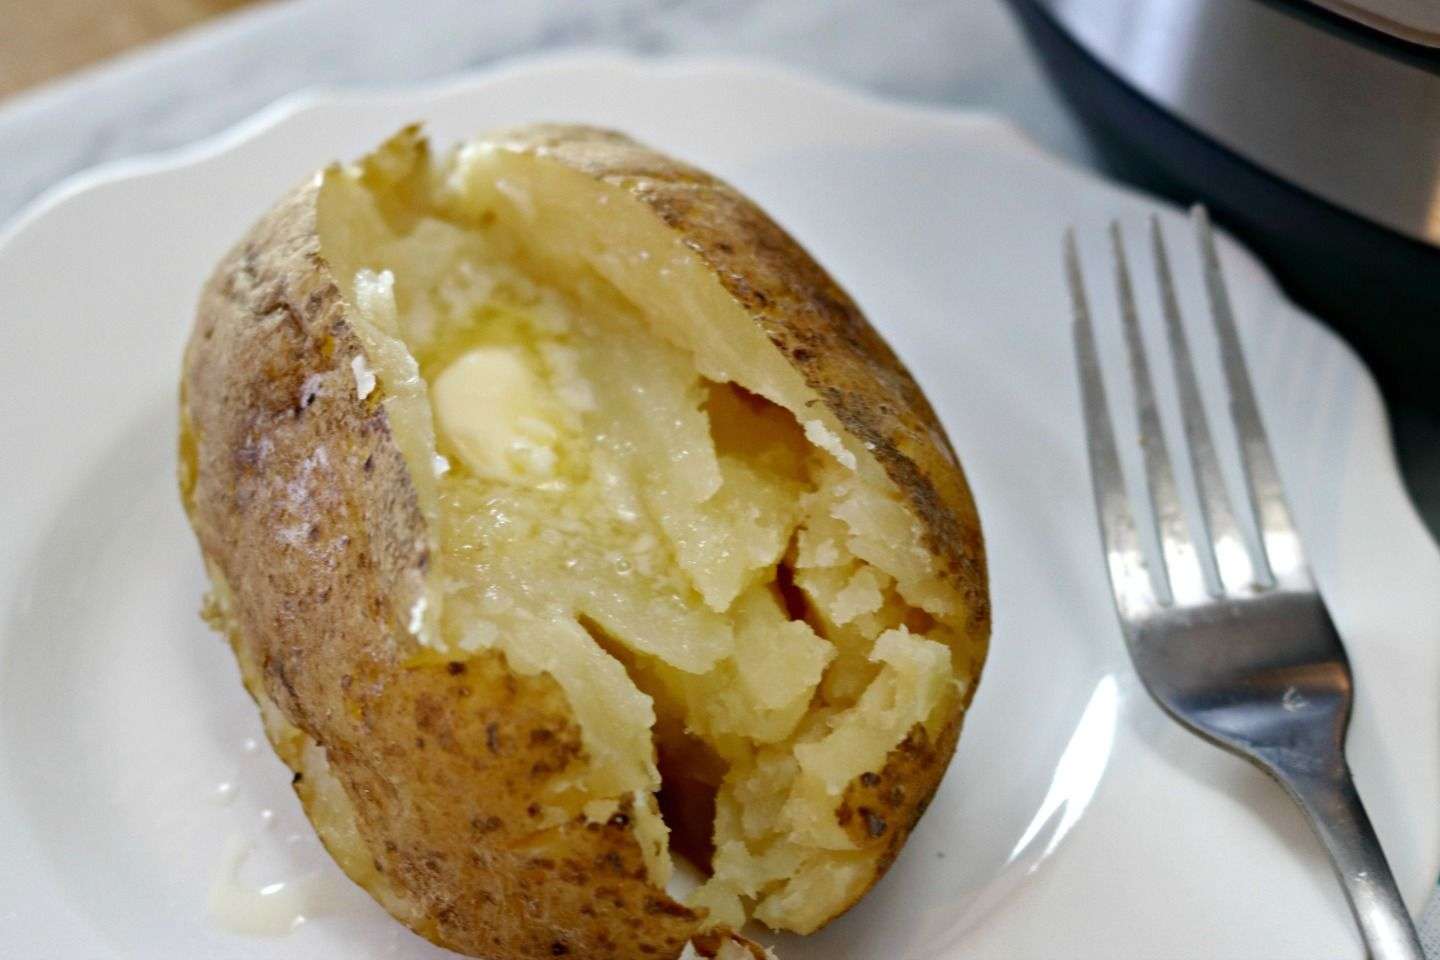 How to Cook Easy Instant Pot Baked Potatoes